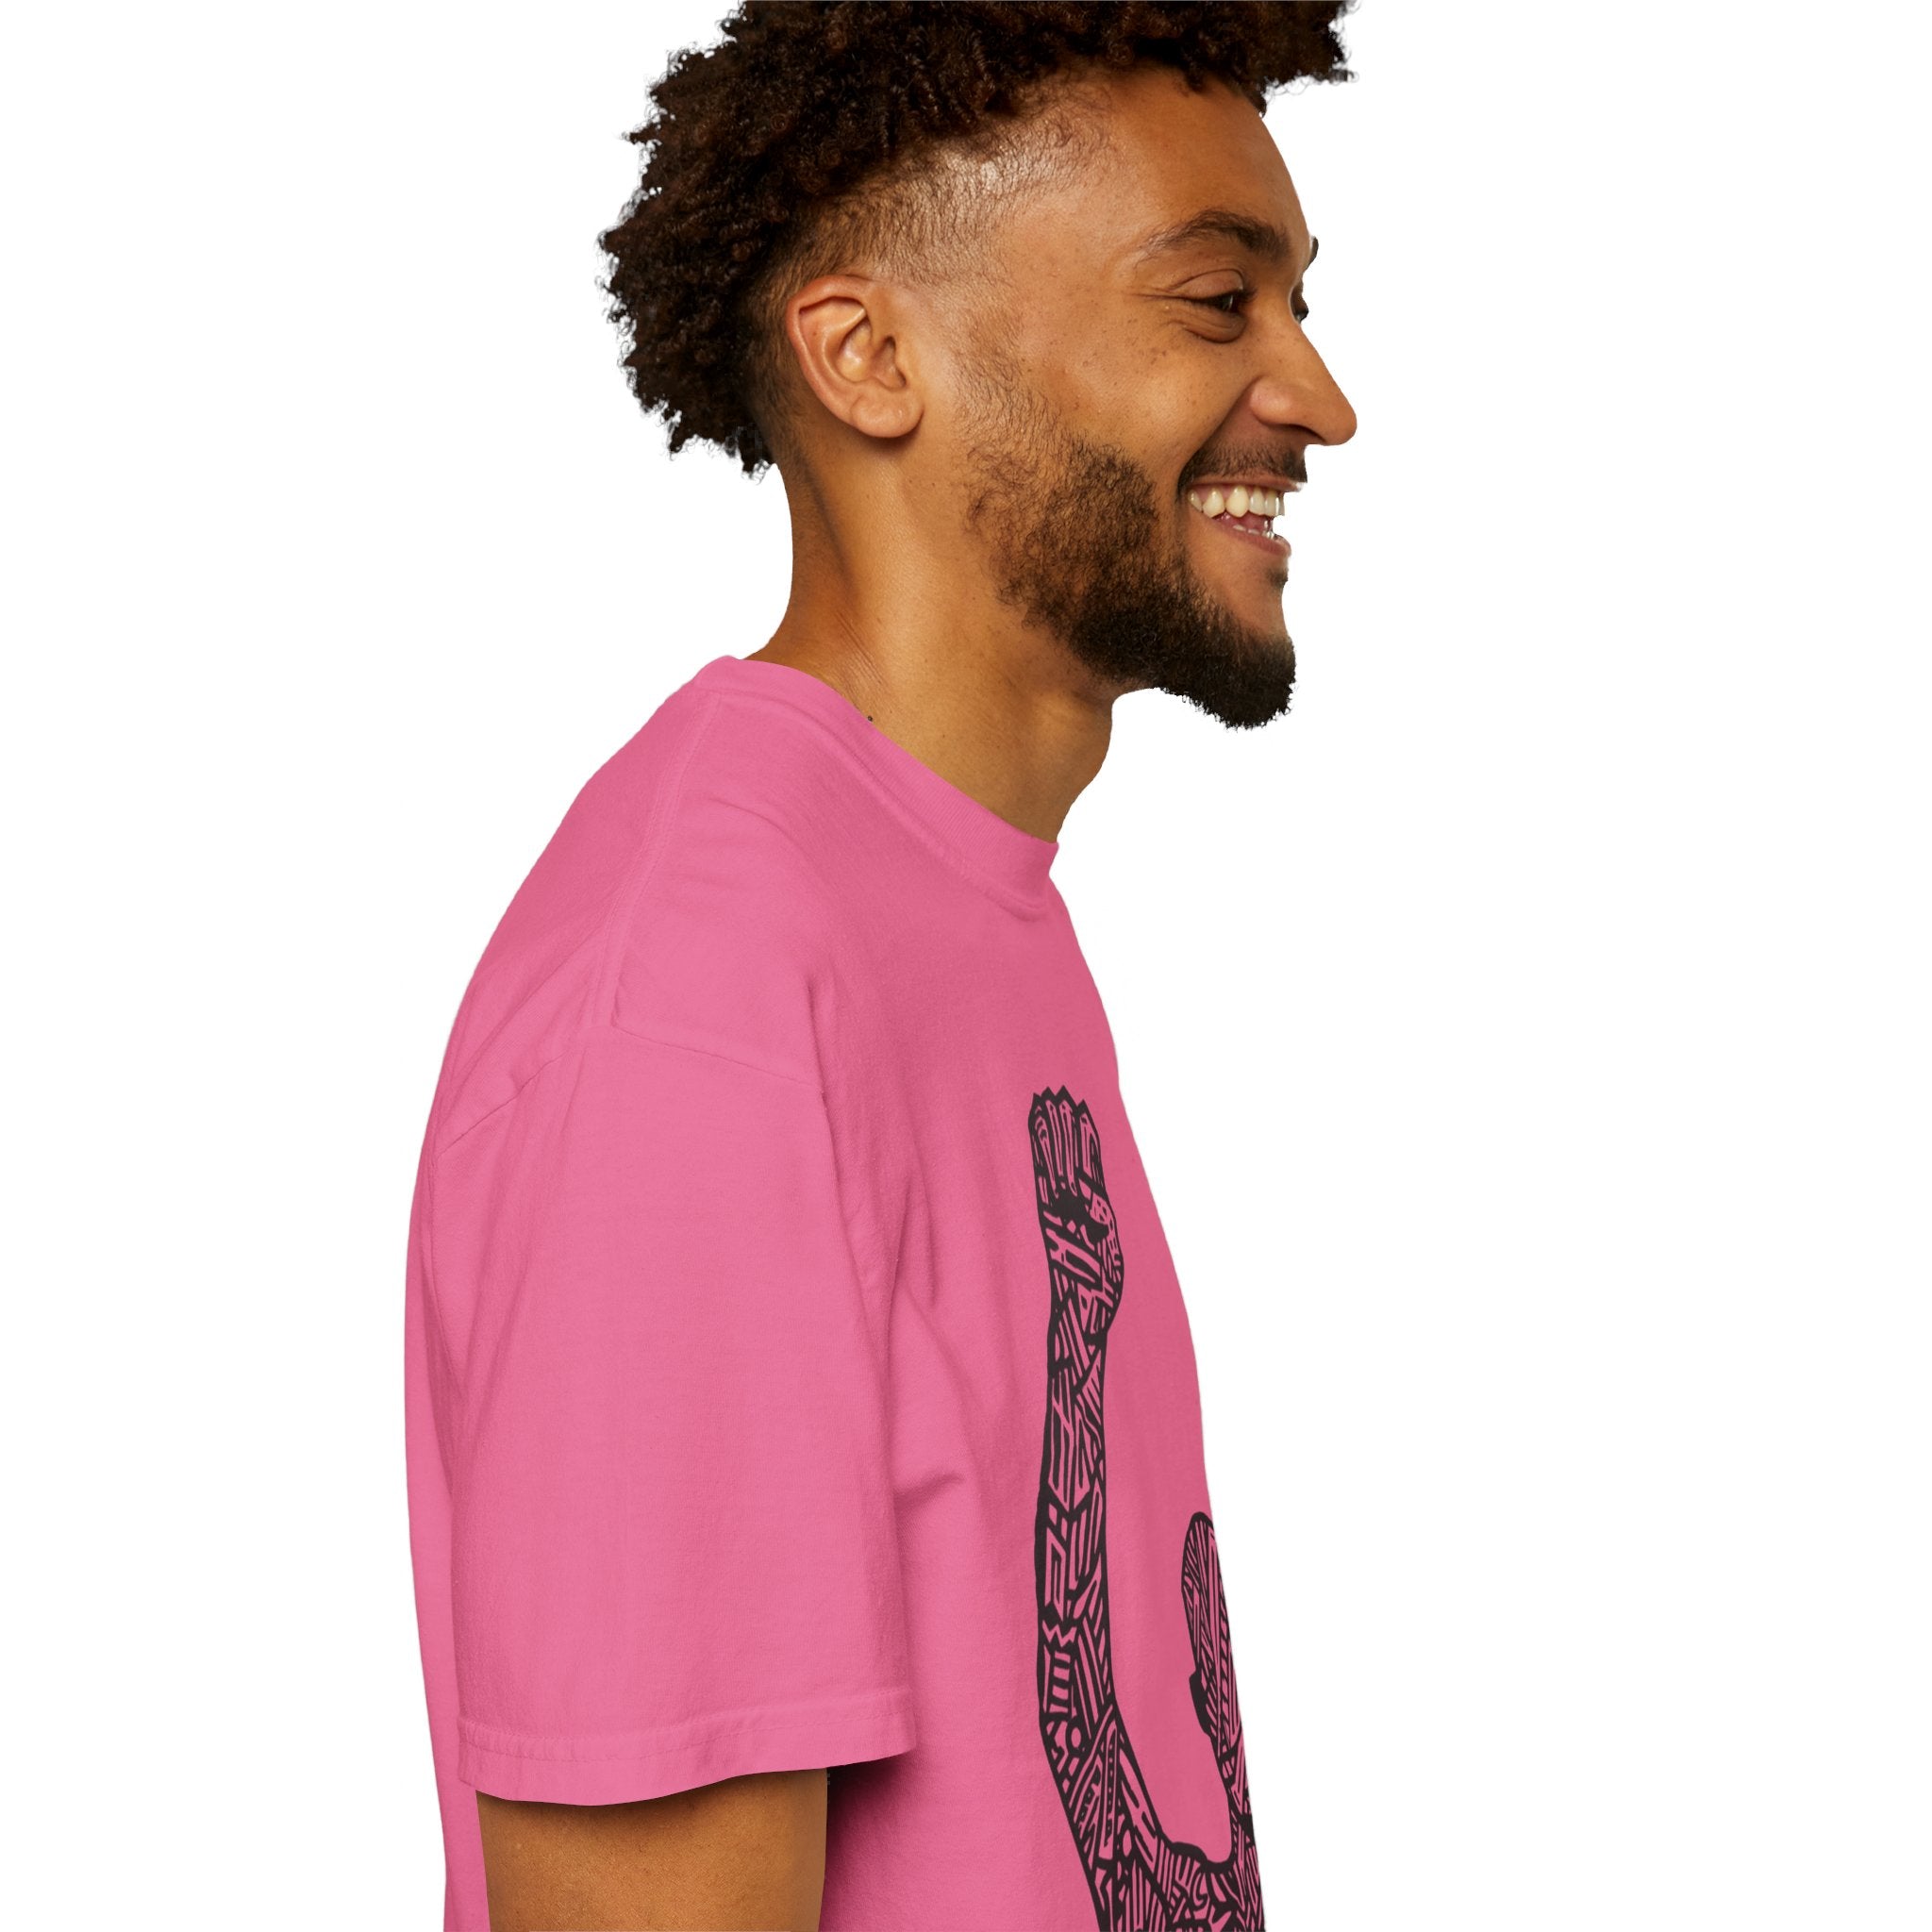 The image features a stylish unisex garment-dyed t-shirt in a rich, deep color. The front displays a striking silhouette of a raised fist, symbolizing strength and unity. The tee’s soft, comfortable fabric and relaxed fit are also highlighted, making it a blend of style, comfort, and meaning.